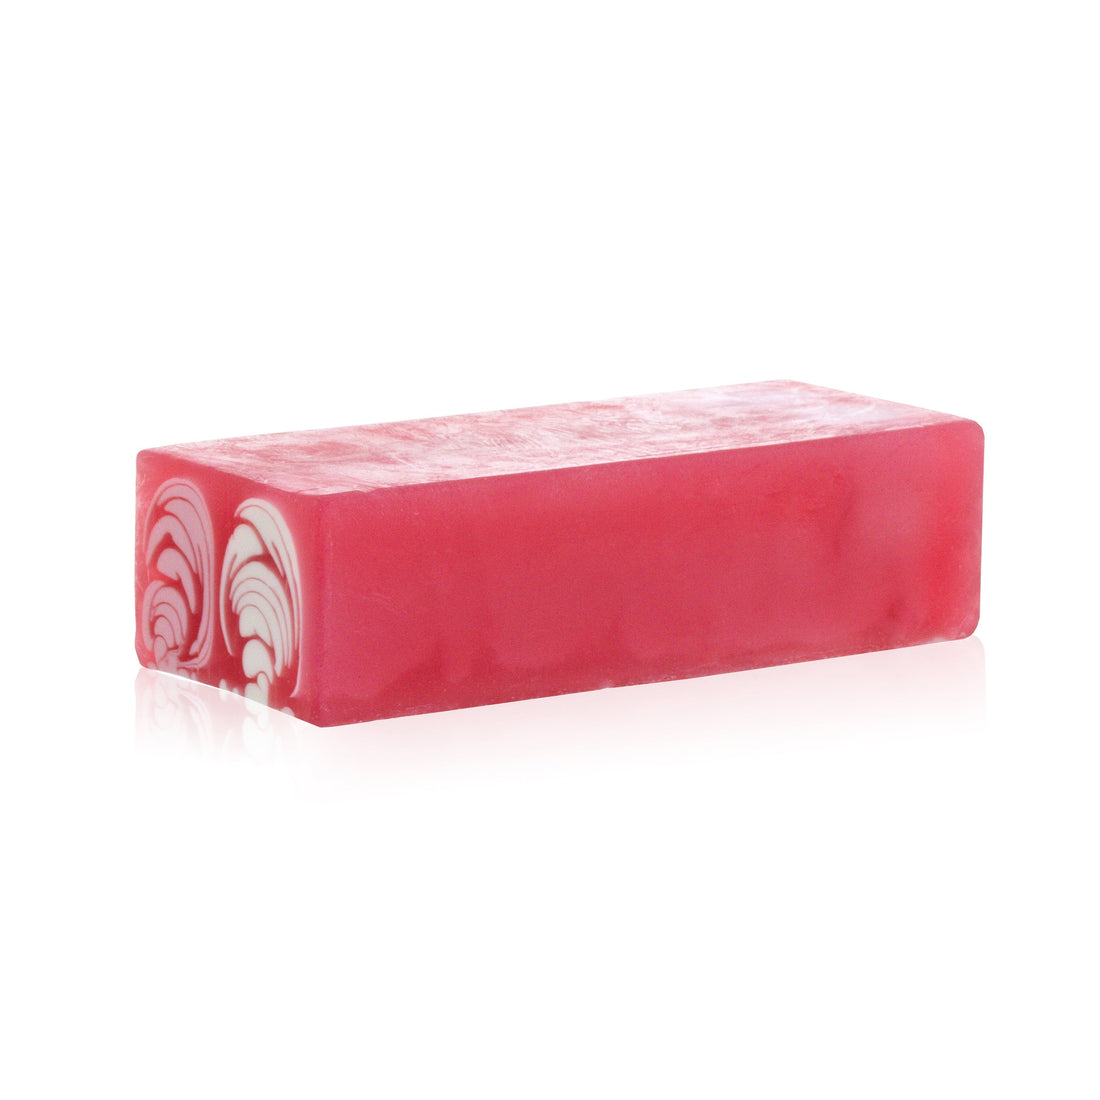 Hand-crafted Soap - Rose - best price from Maltashopper.com HSBS-12